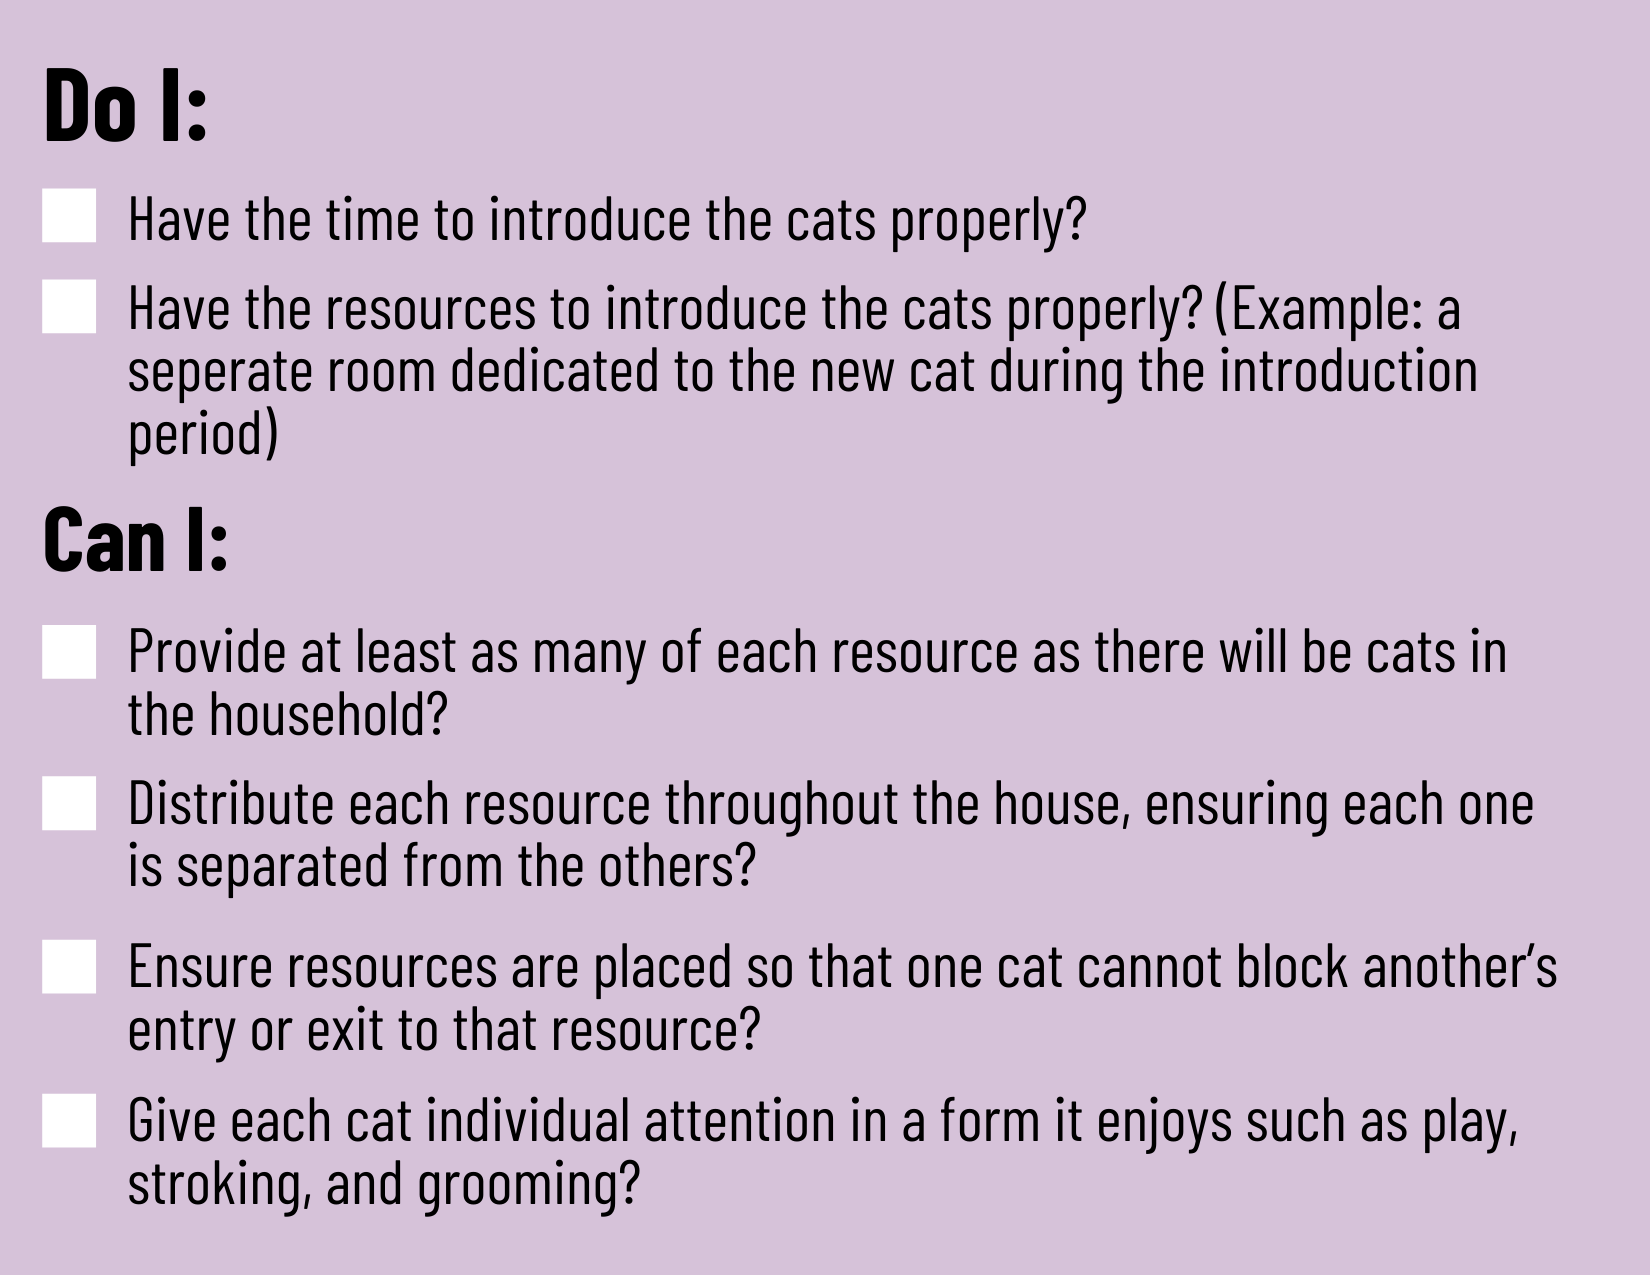 Checklist before getting another cat